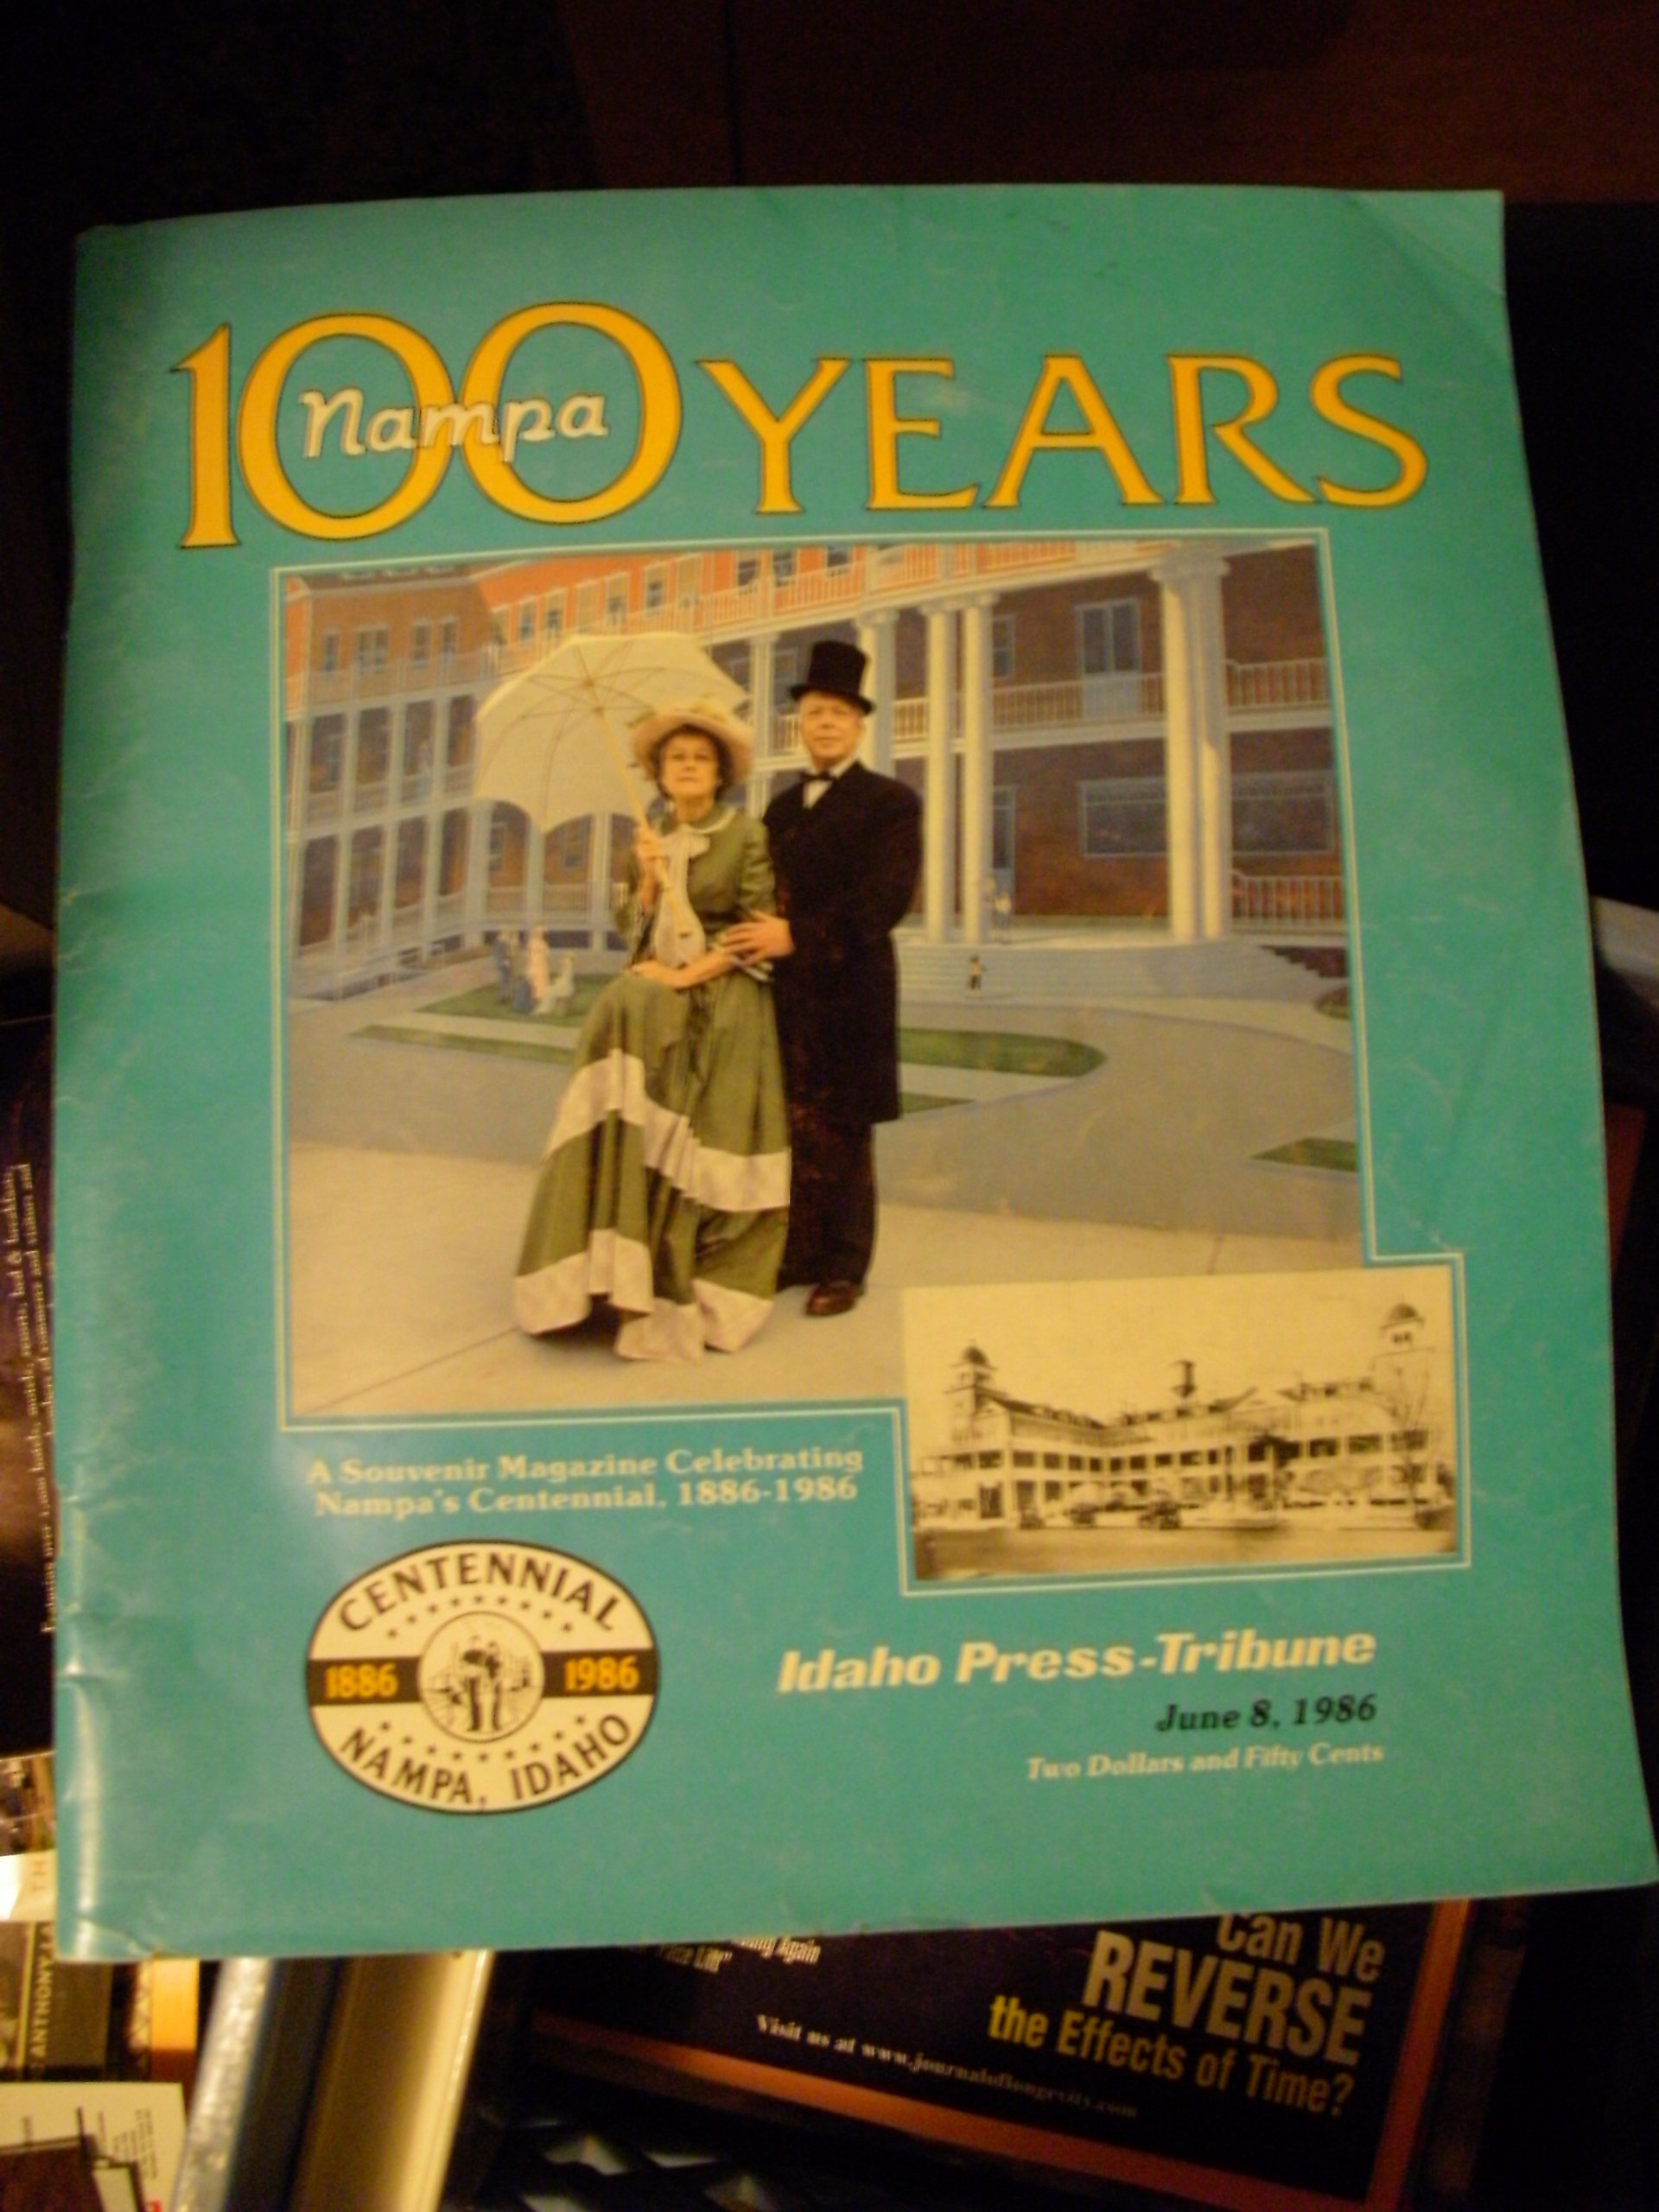 Nampa 100 years (book cover)